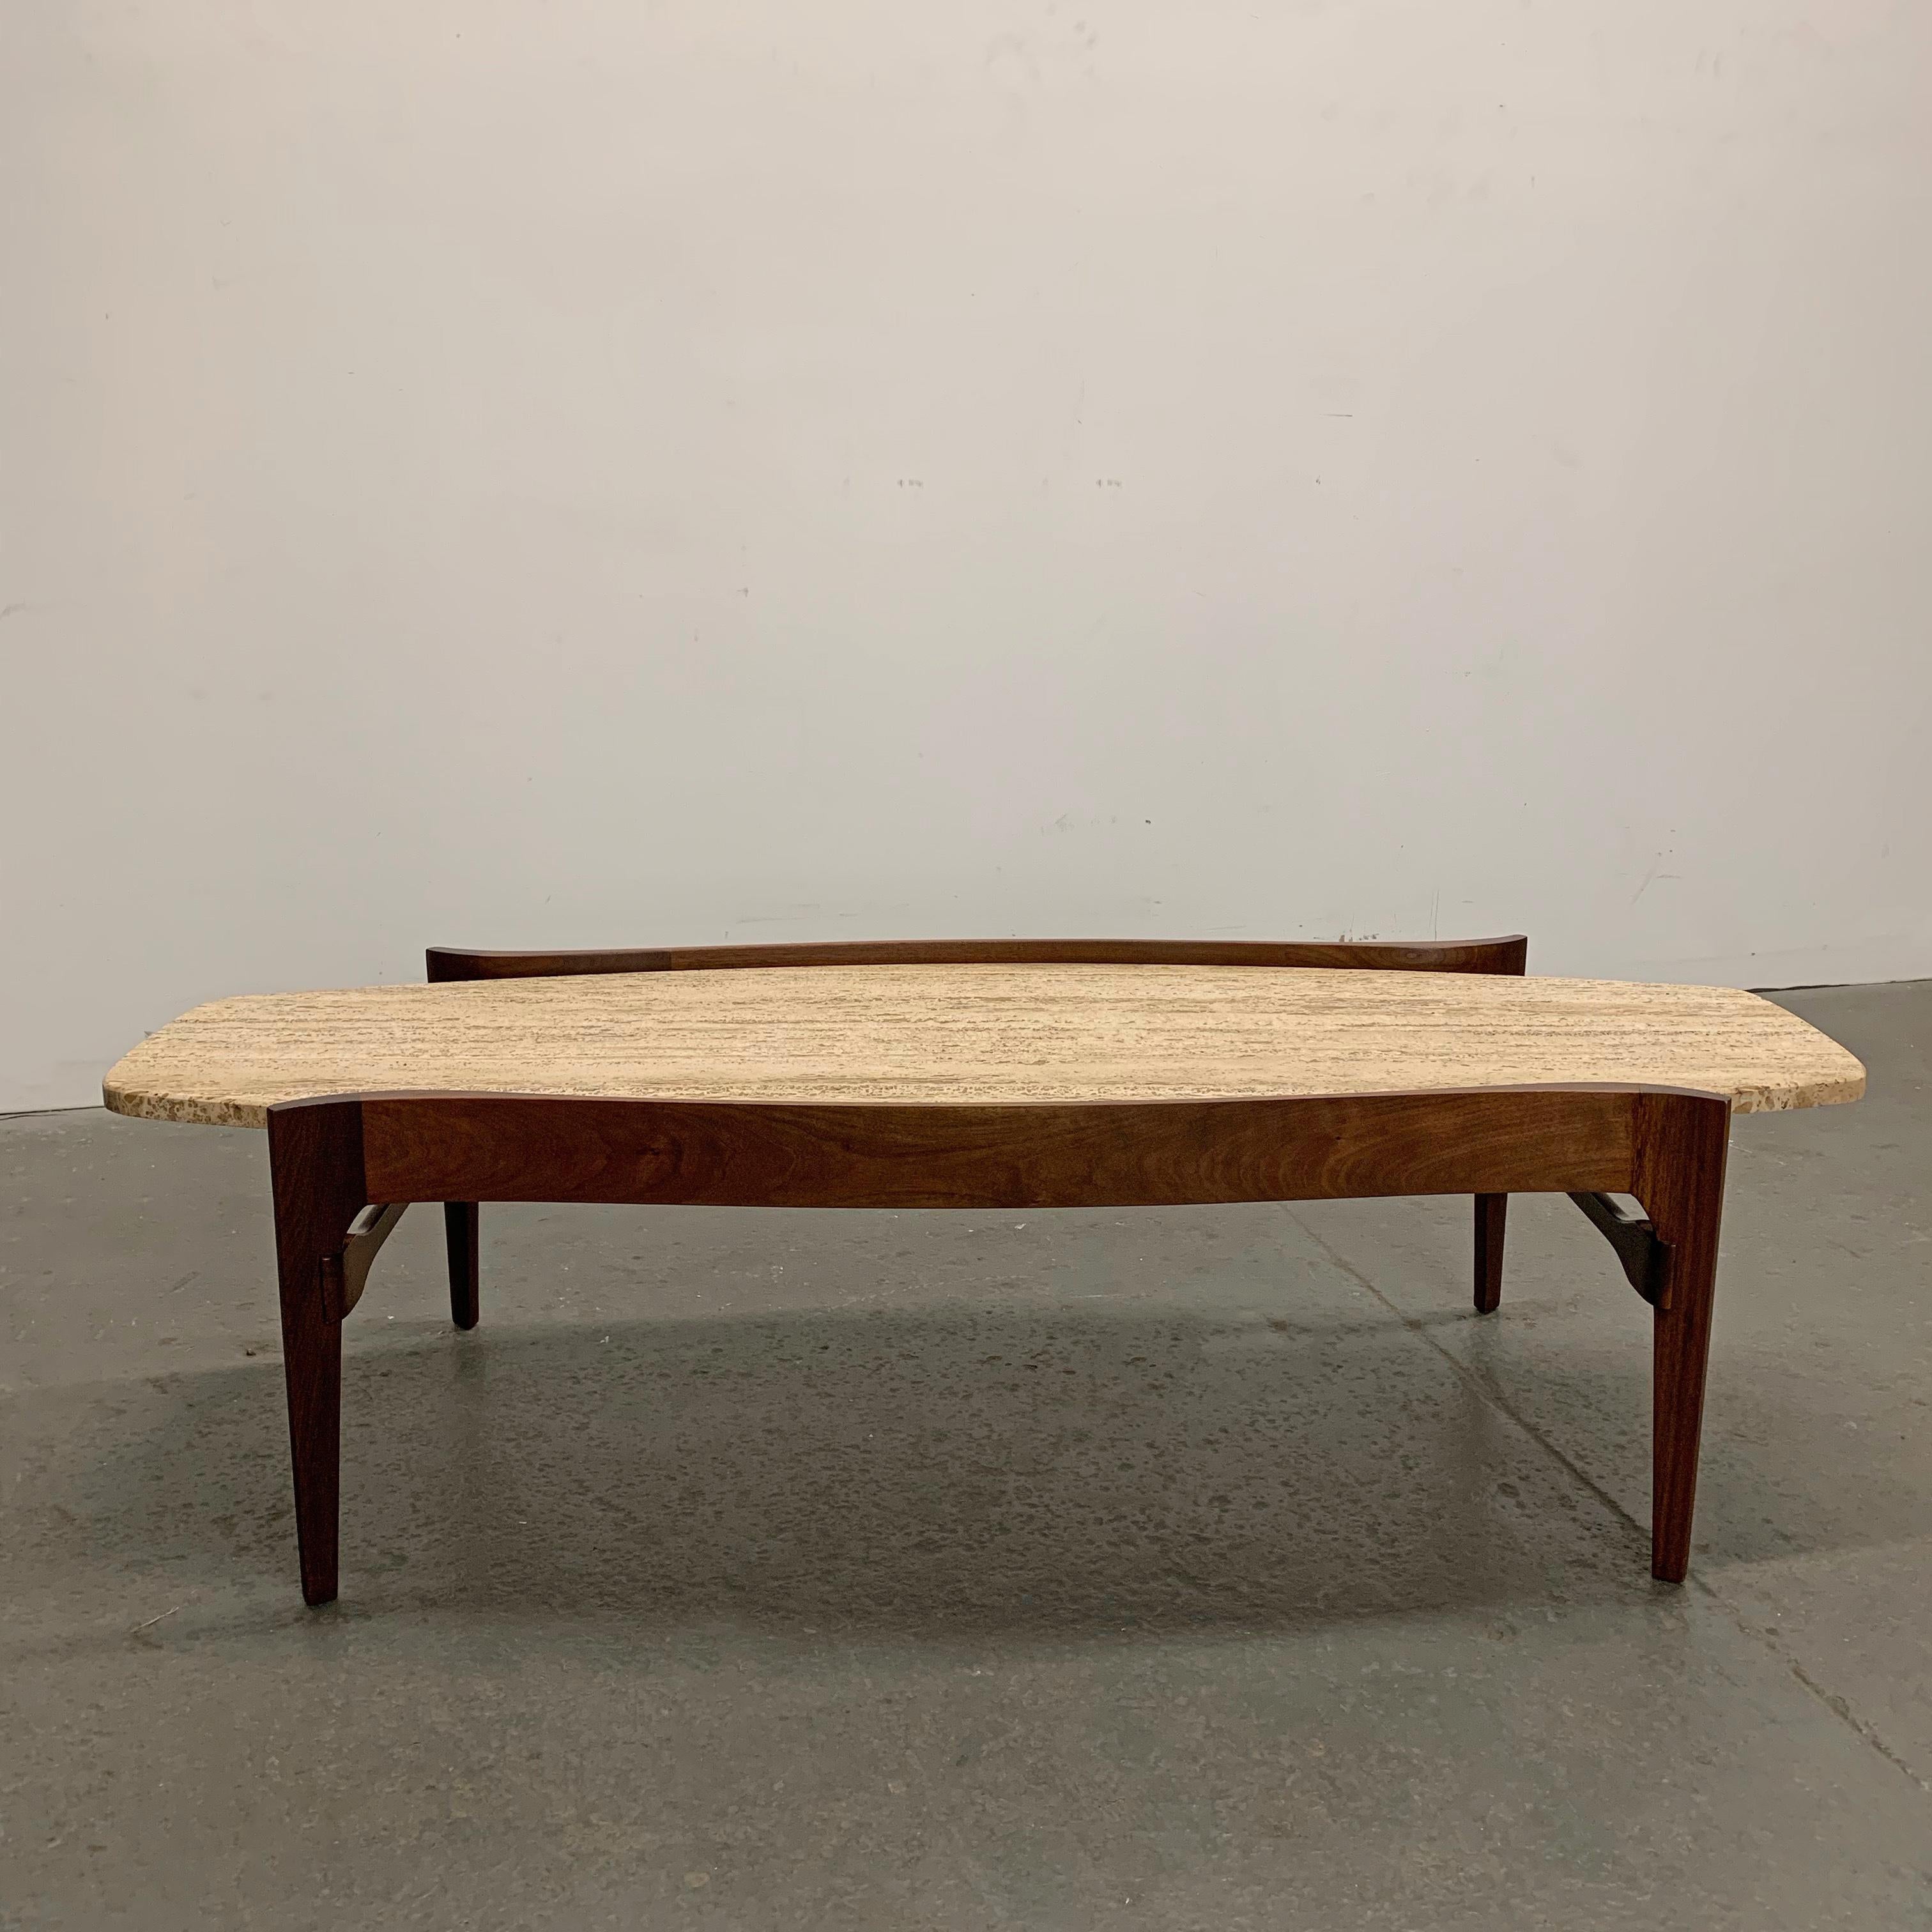 Mid-Century Modern coffee table by Bertha Schaefer for M. Singer & Sons features a travertine stone top resting in a beautifully detailed, contoured walnut frame.